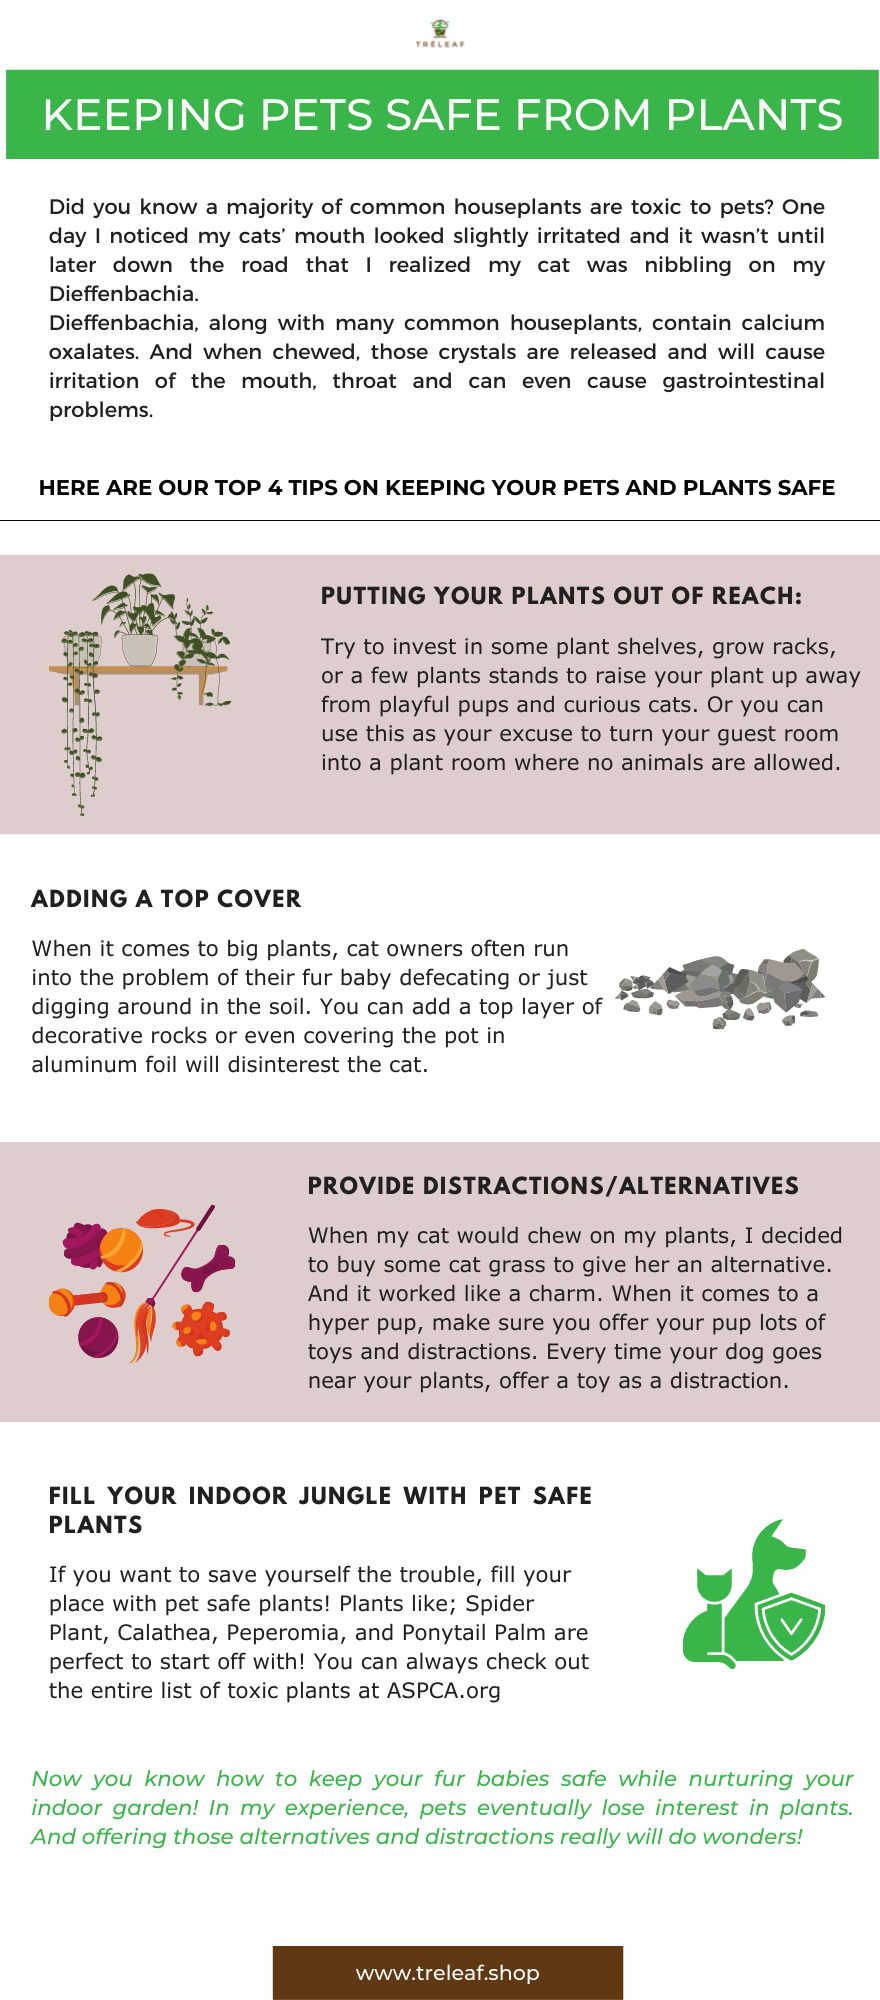 infographic explaining how to keep pets safe from toxic houseplants